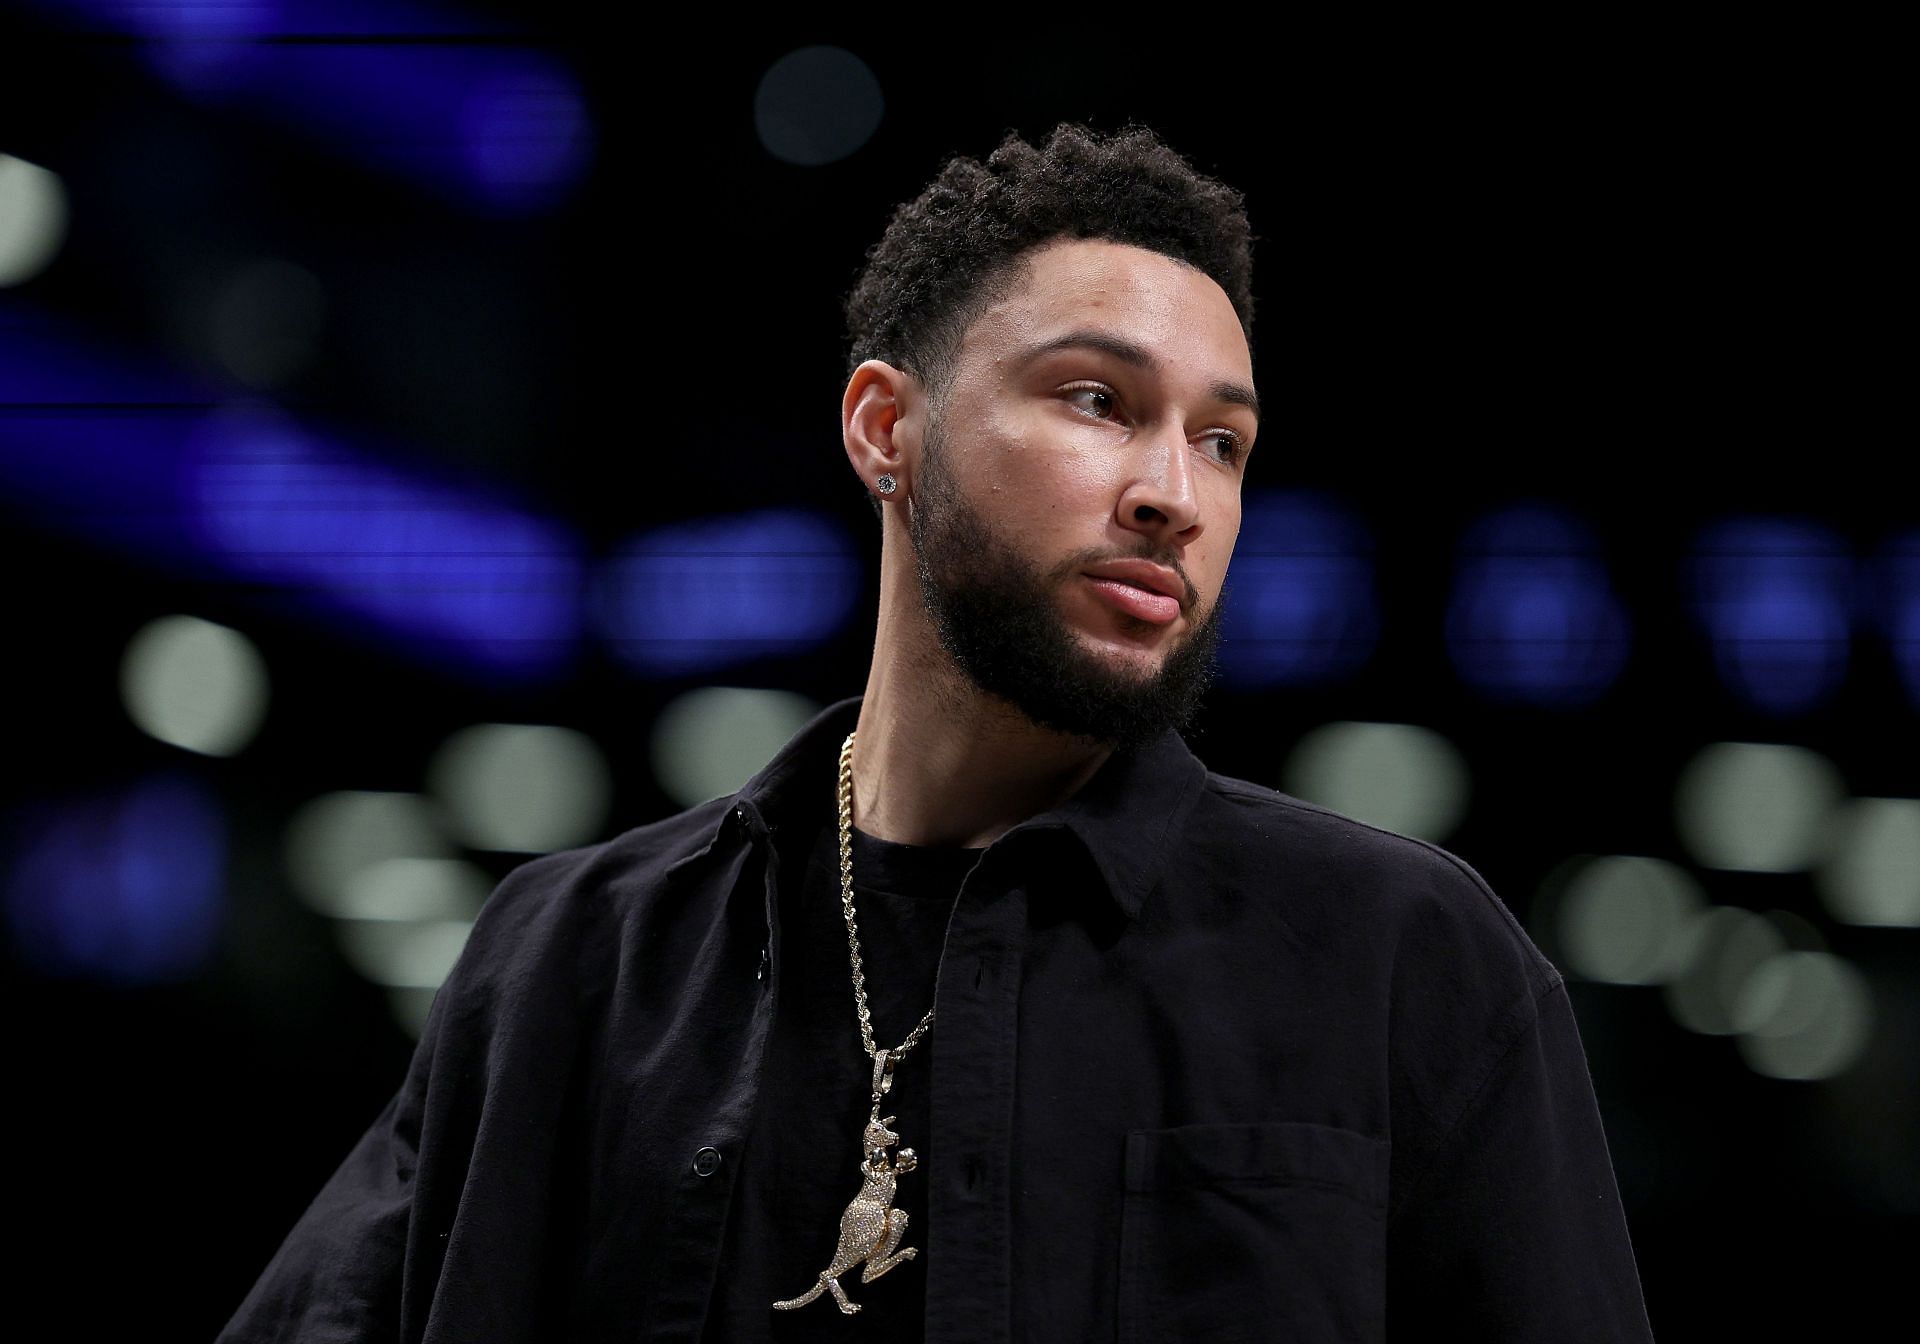 Simmons dated a popular singer for less than a year (Image via Getty Images)